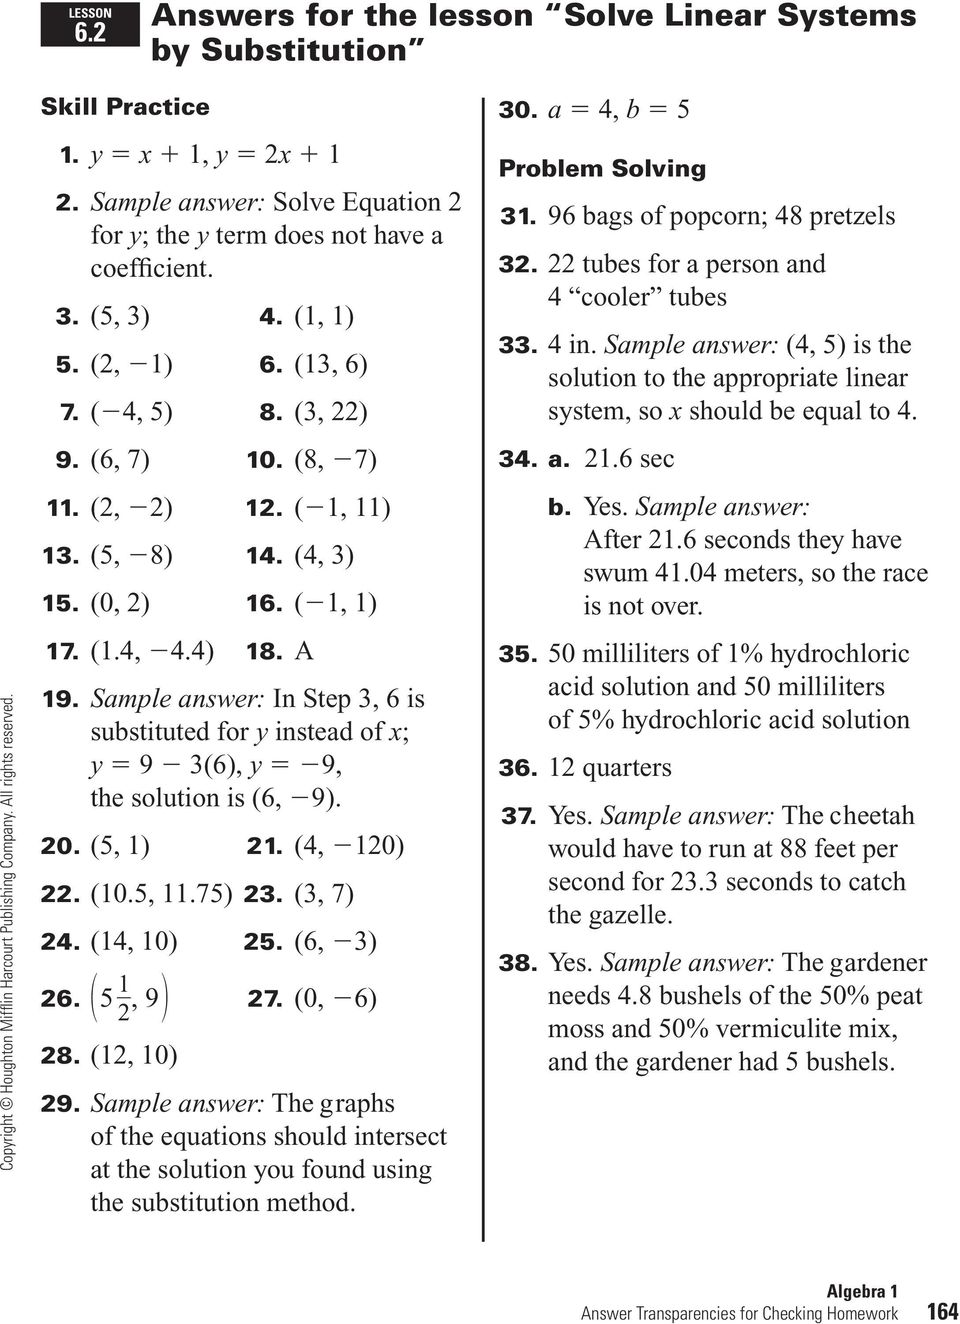 20 20 skills practice solving systems of equations In Substitution Method Worksheet Answers